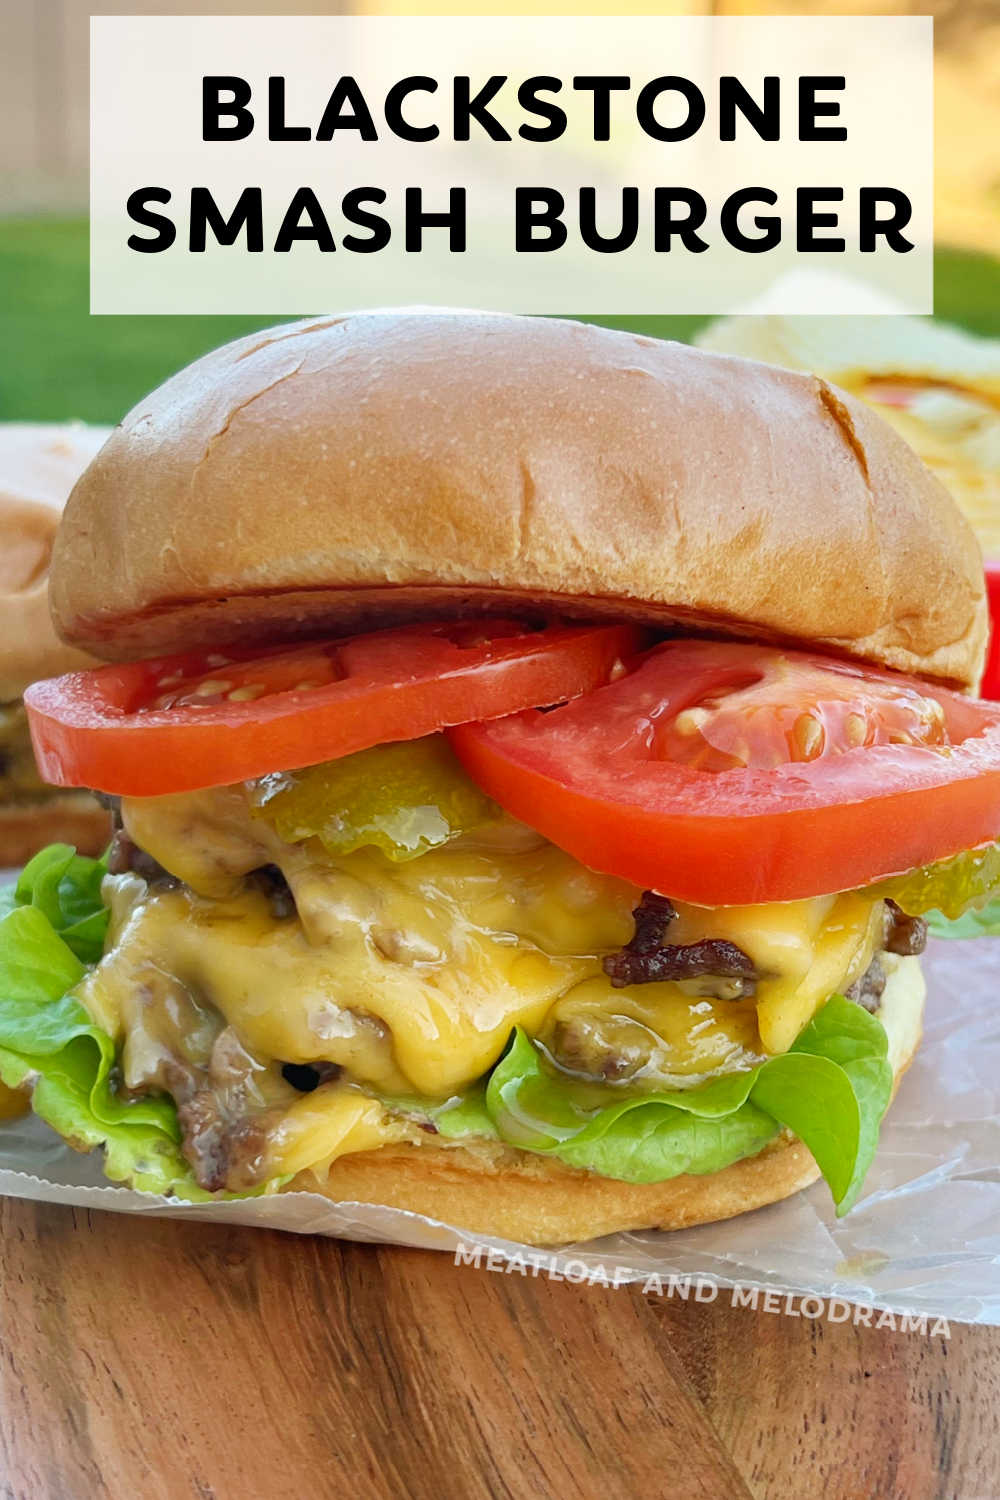 This Blackstone Smash Burger recipe lets you make homemade smash burgers on the Blackstone griddle or any flat top grill. Better than takeout and a new family favorite! via @meamel